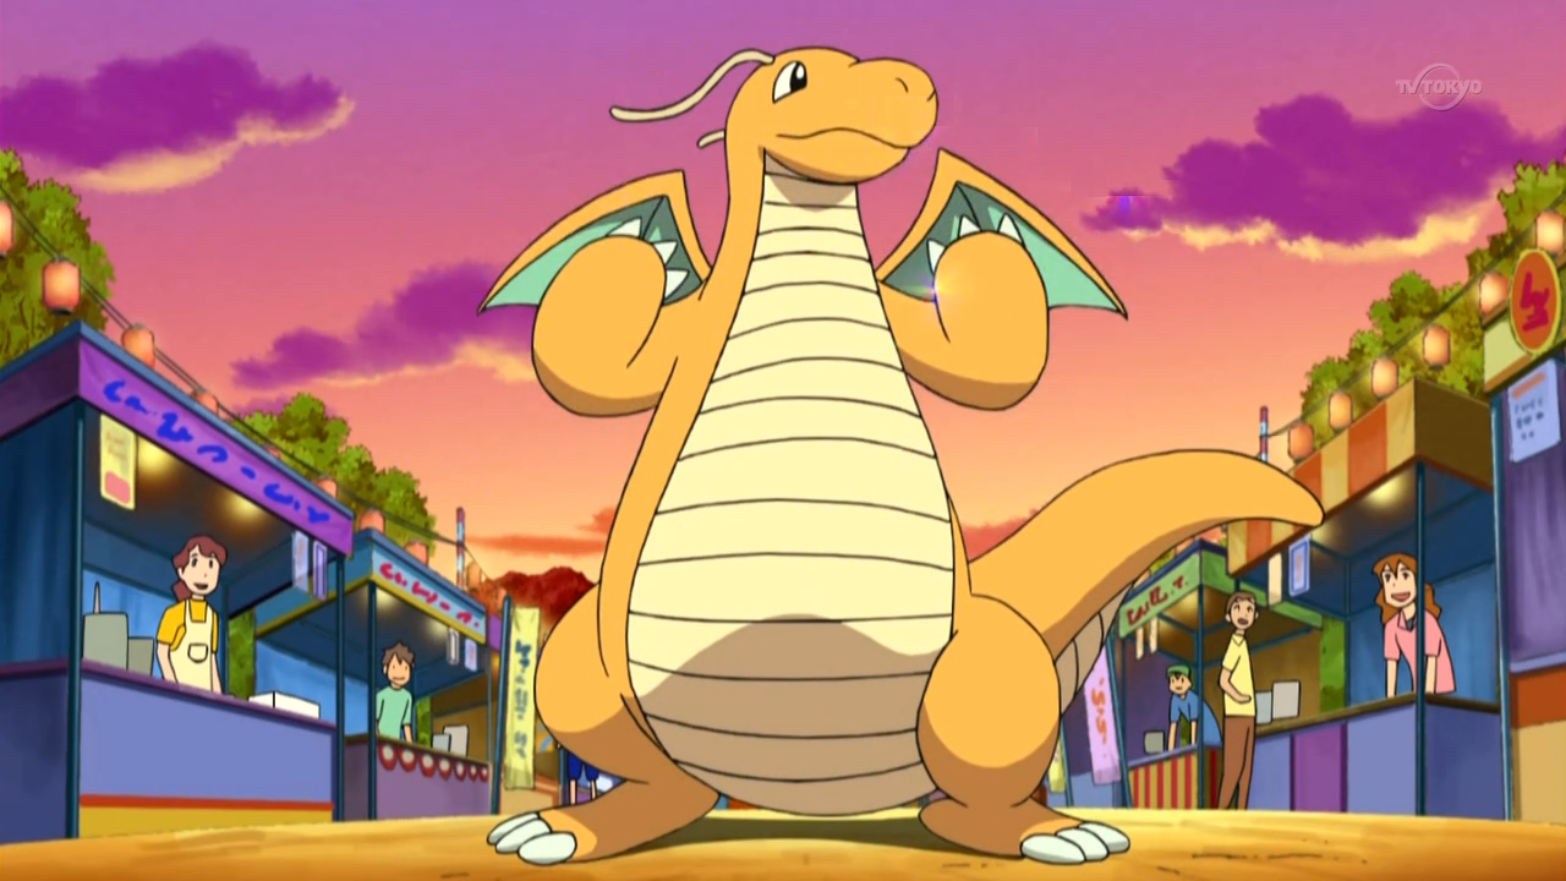 Since dragonite is being brought up a lot I have to say that, her losses  were because her character was concluded early on in the show. She proved  herself by beating a